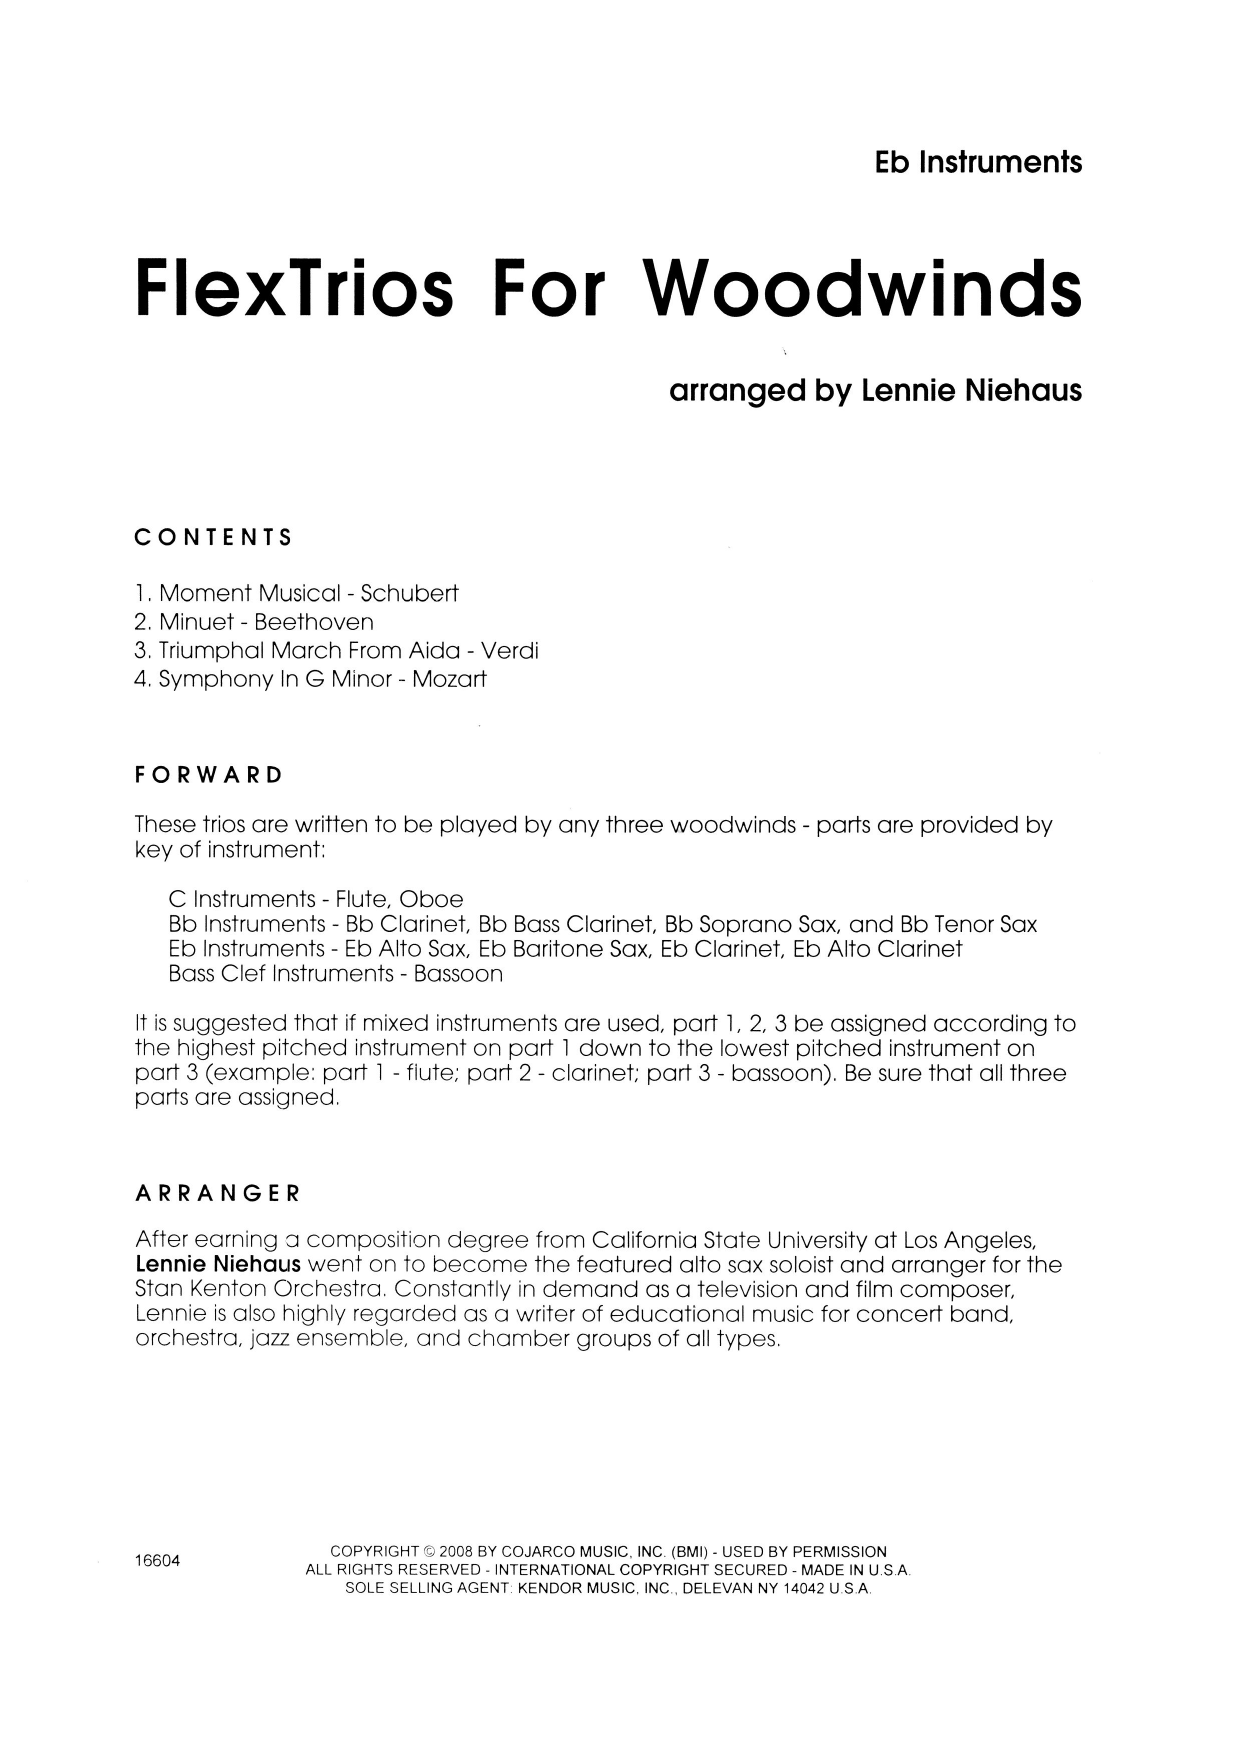 FlexTrios For Woodwinds (playable by any three woodwind instruments) - Eb Instruments (Woodwind Ensemble) von Lennie Niehaus